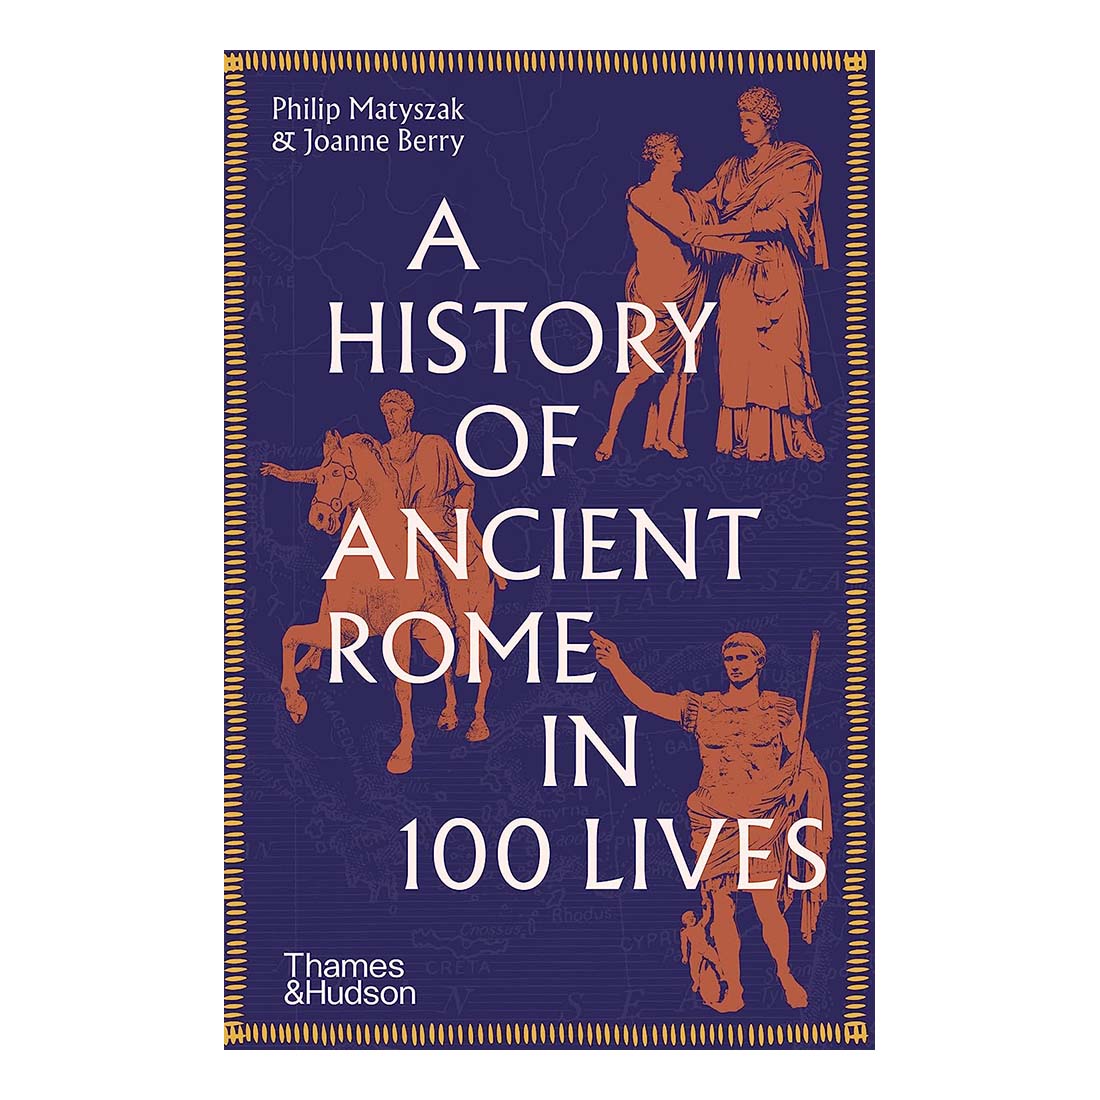 Lives　of　of　Museum　Young　Ancient　Honor　Legion　Rome　de　in　100　History　A　Stores